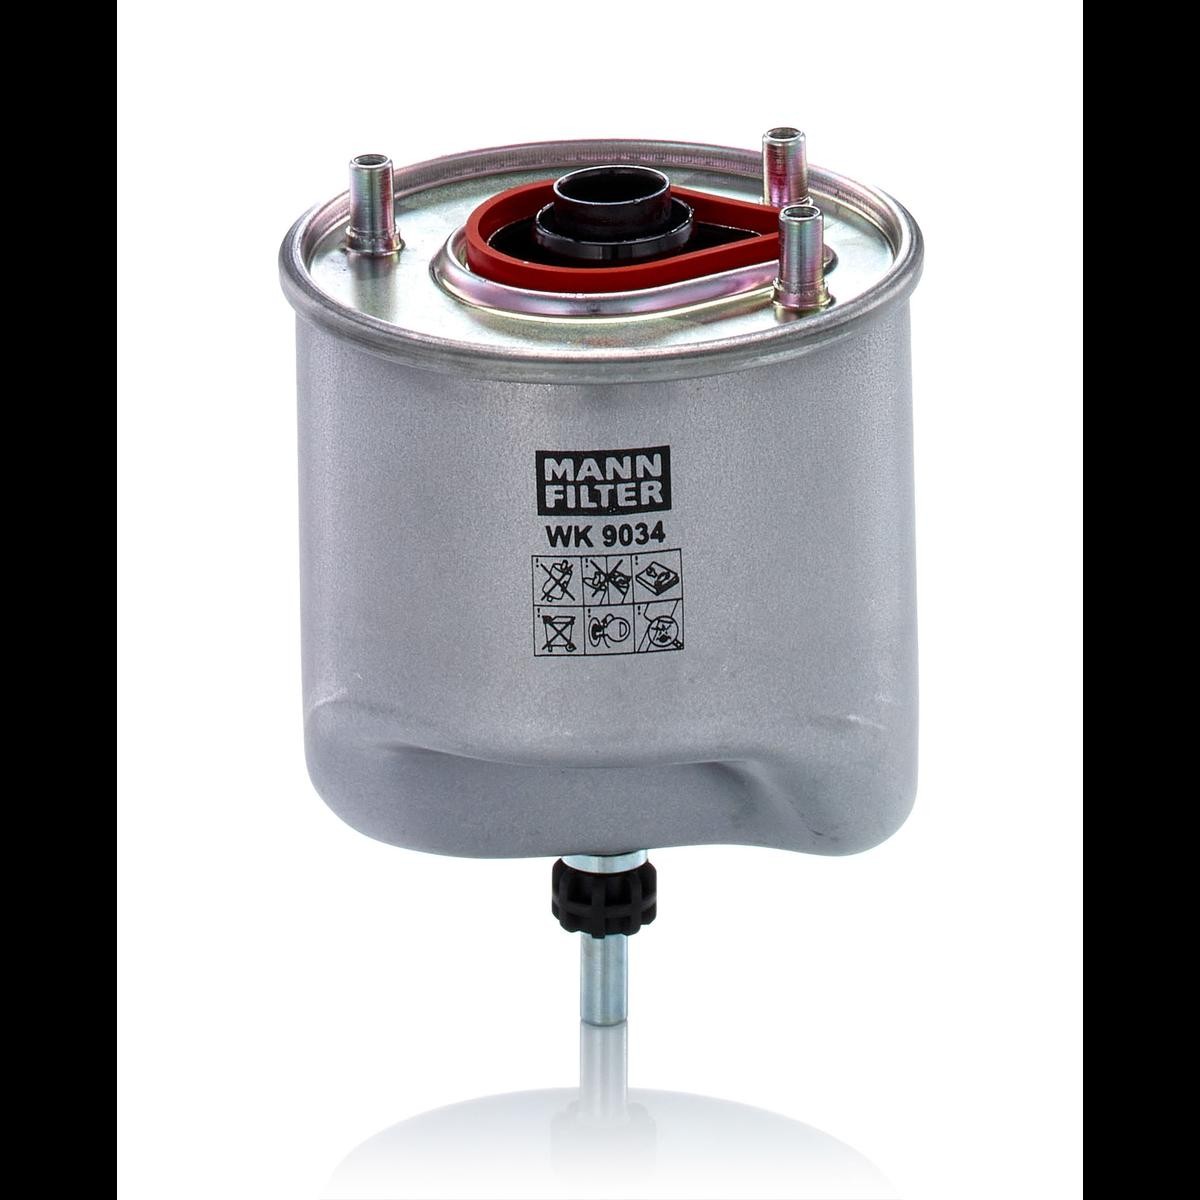 MANN-FILTER WK 9034 Fuel filter MITSUBISHI experience and price